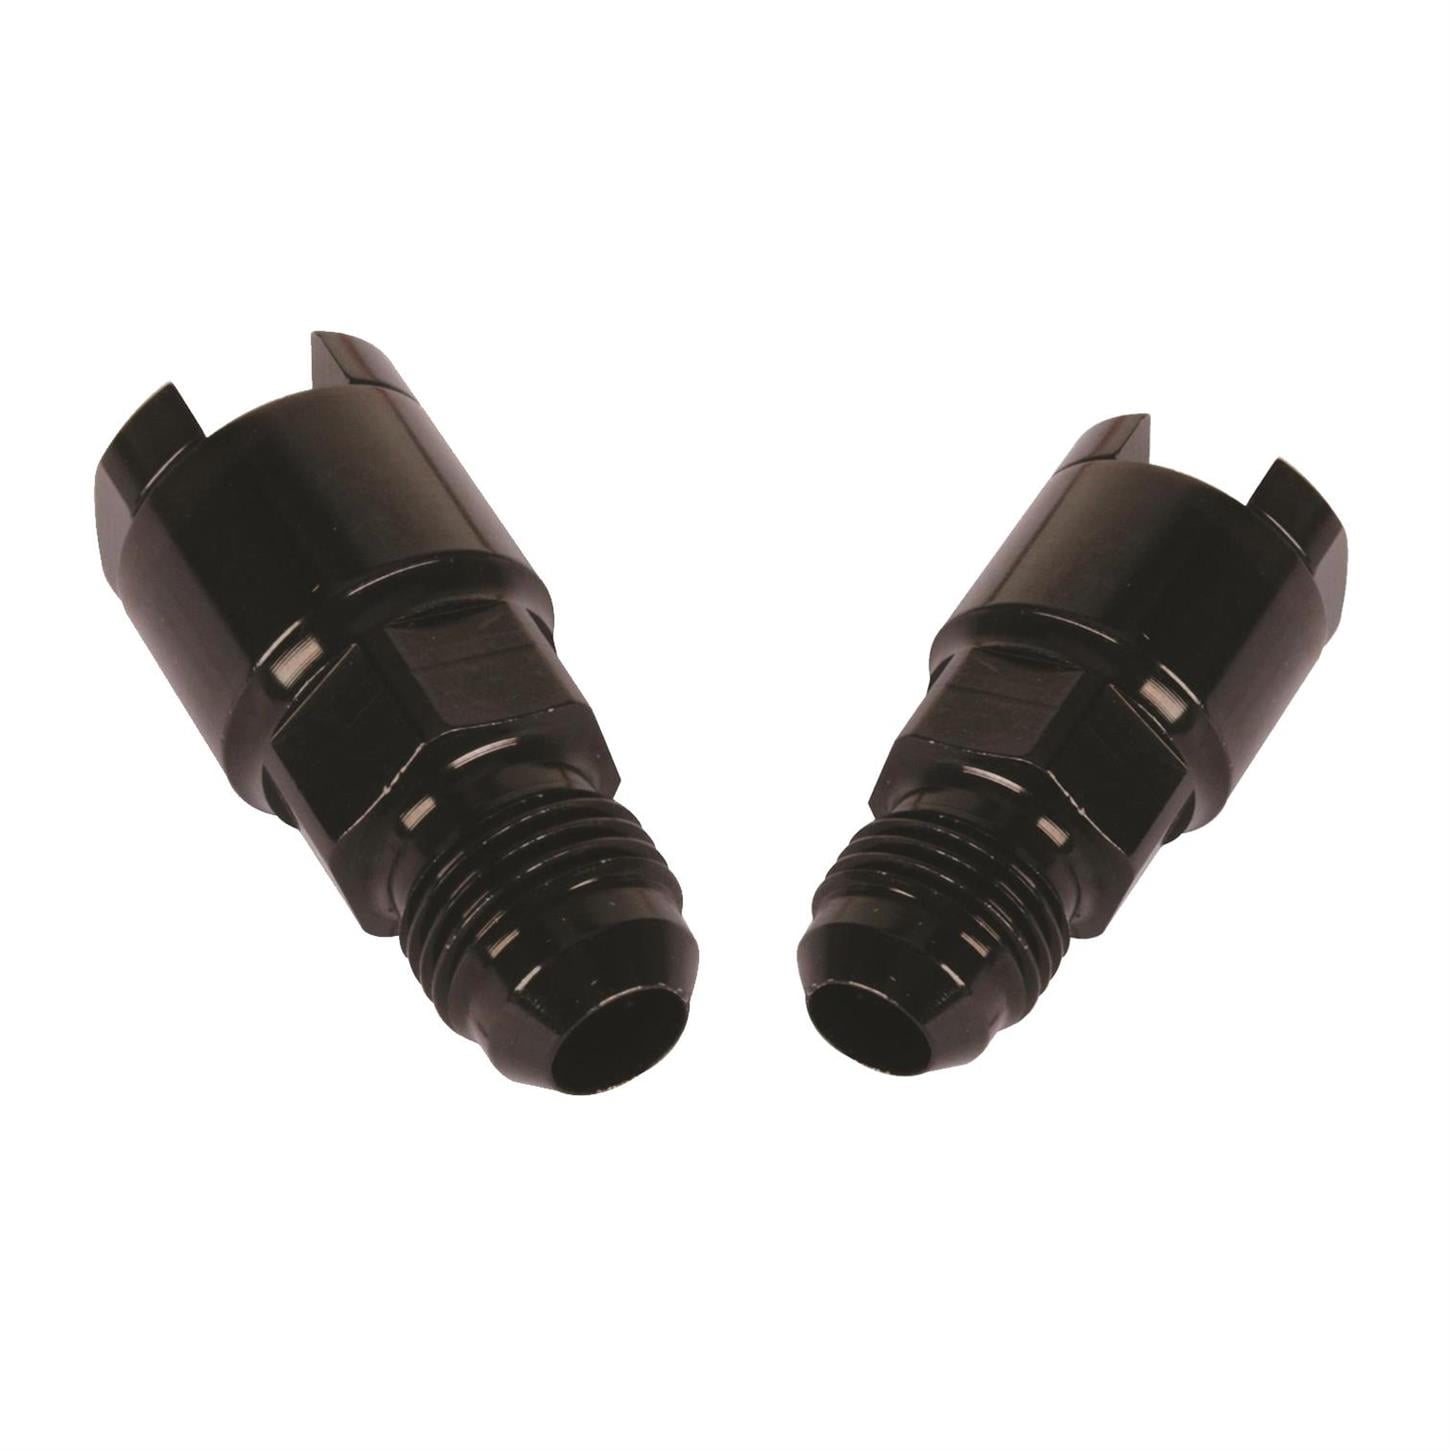 LS1/LT1 Fuel Line Fitting Kit, -6 AN Male To 5/16 & 3/8 Female